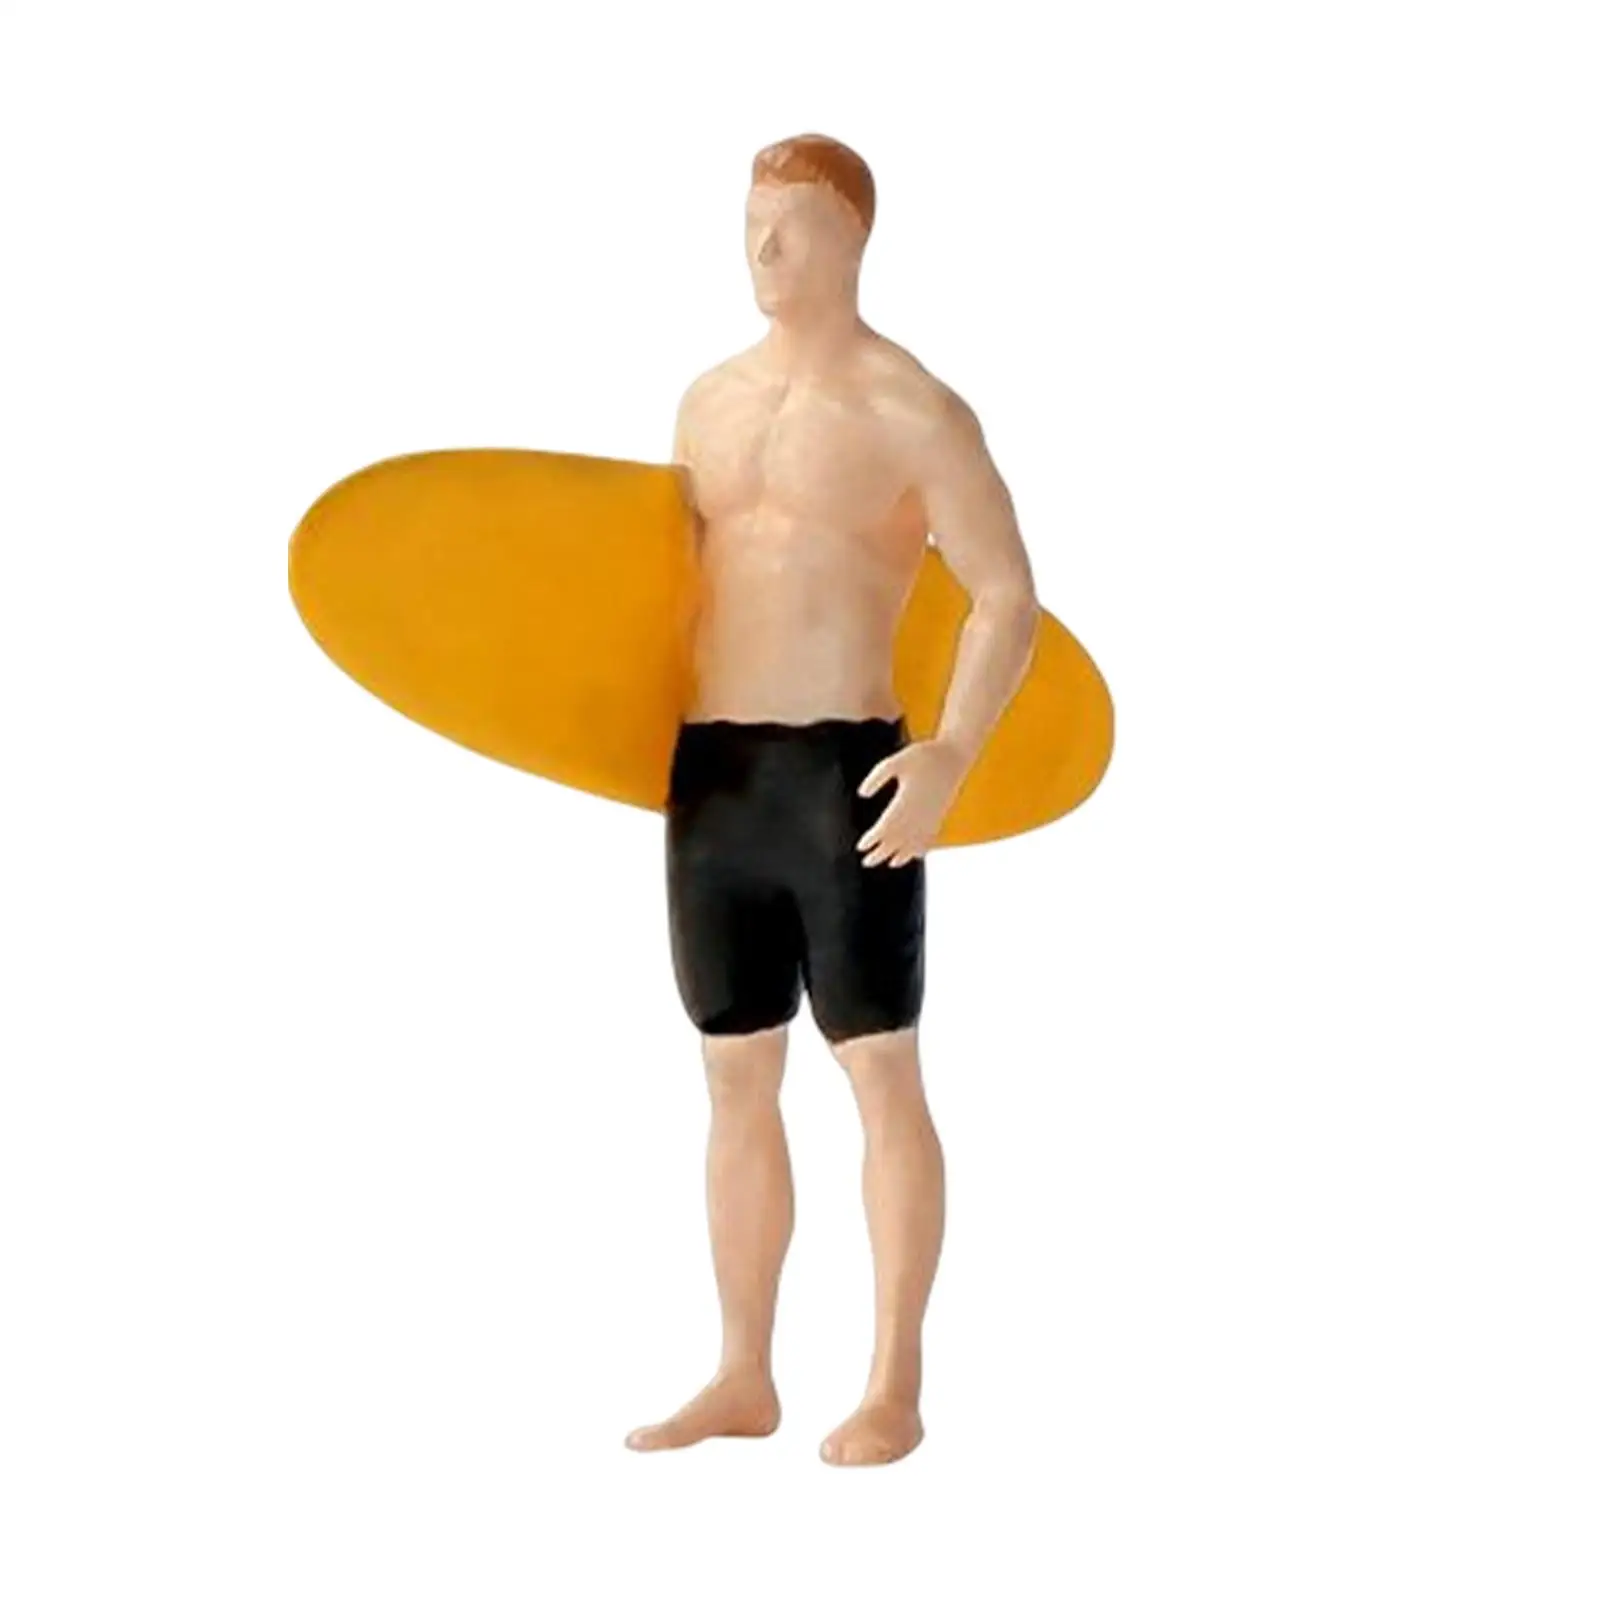 Resin 1/64 Model Surfing Boy Model Model Trains People Figures Hand Painted for Miniature Scene Architecture Layout Decoration